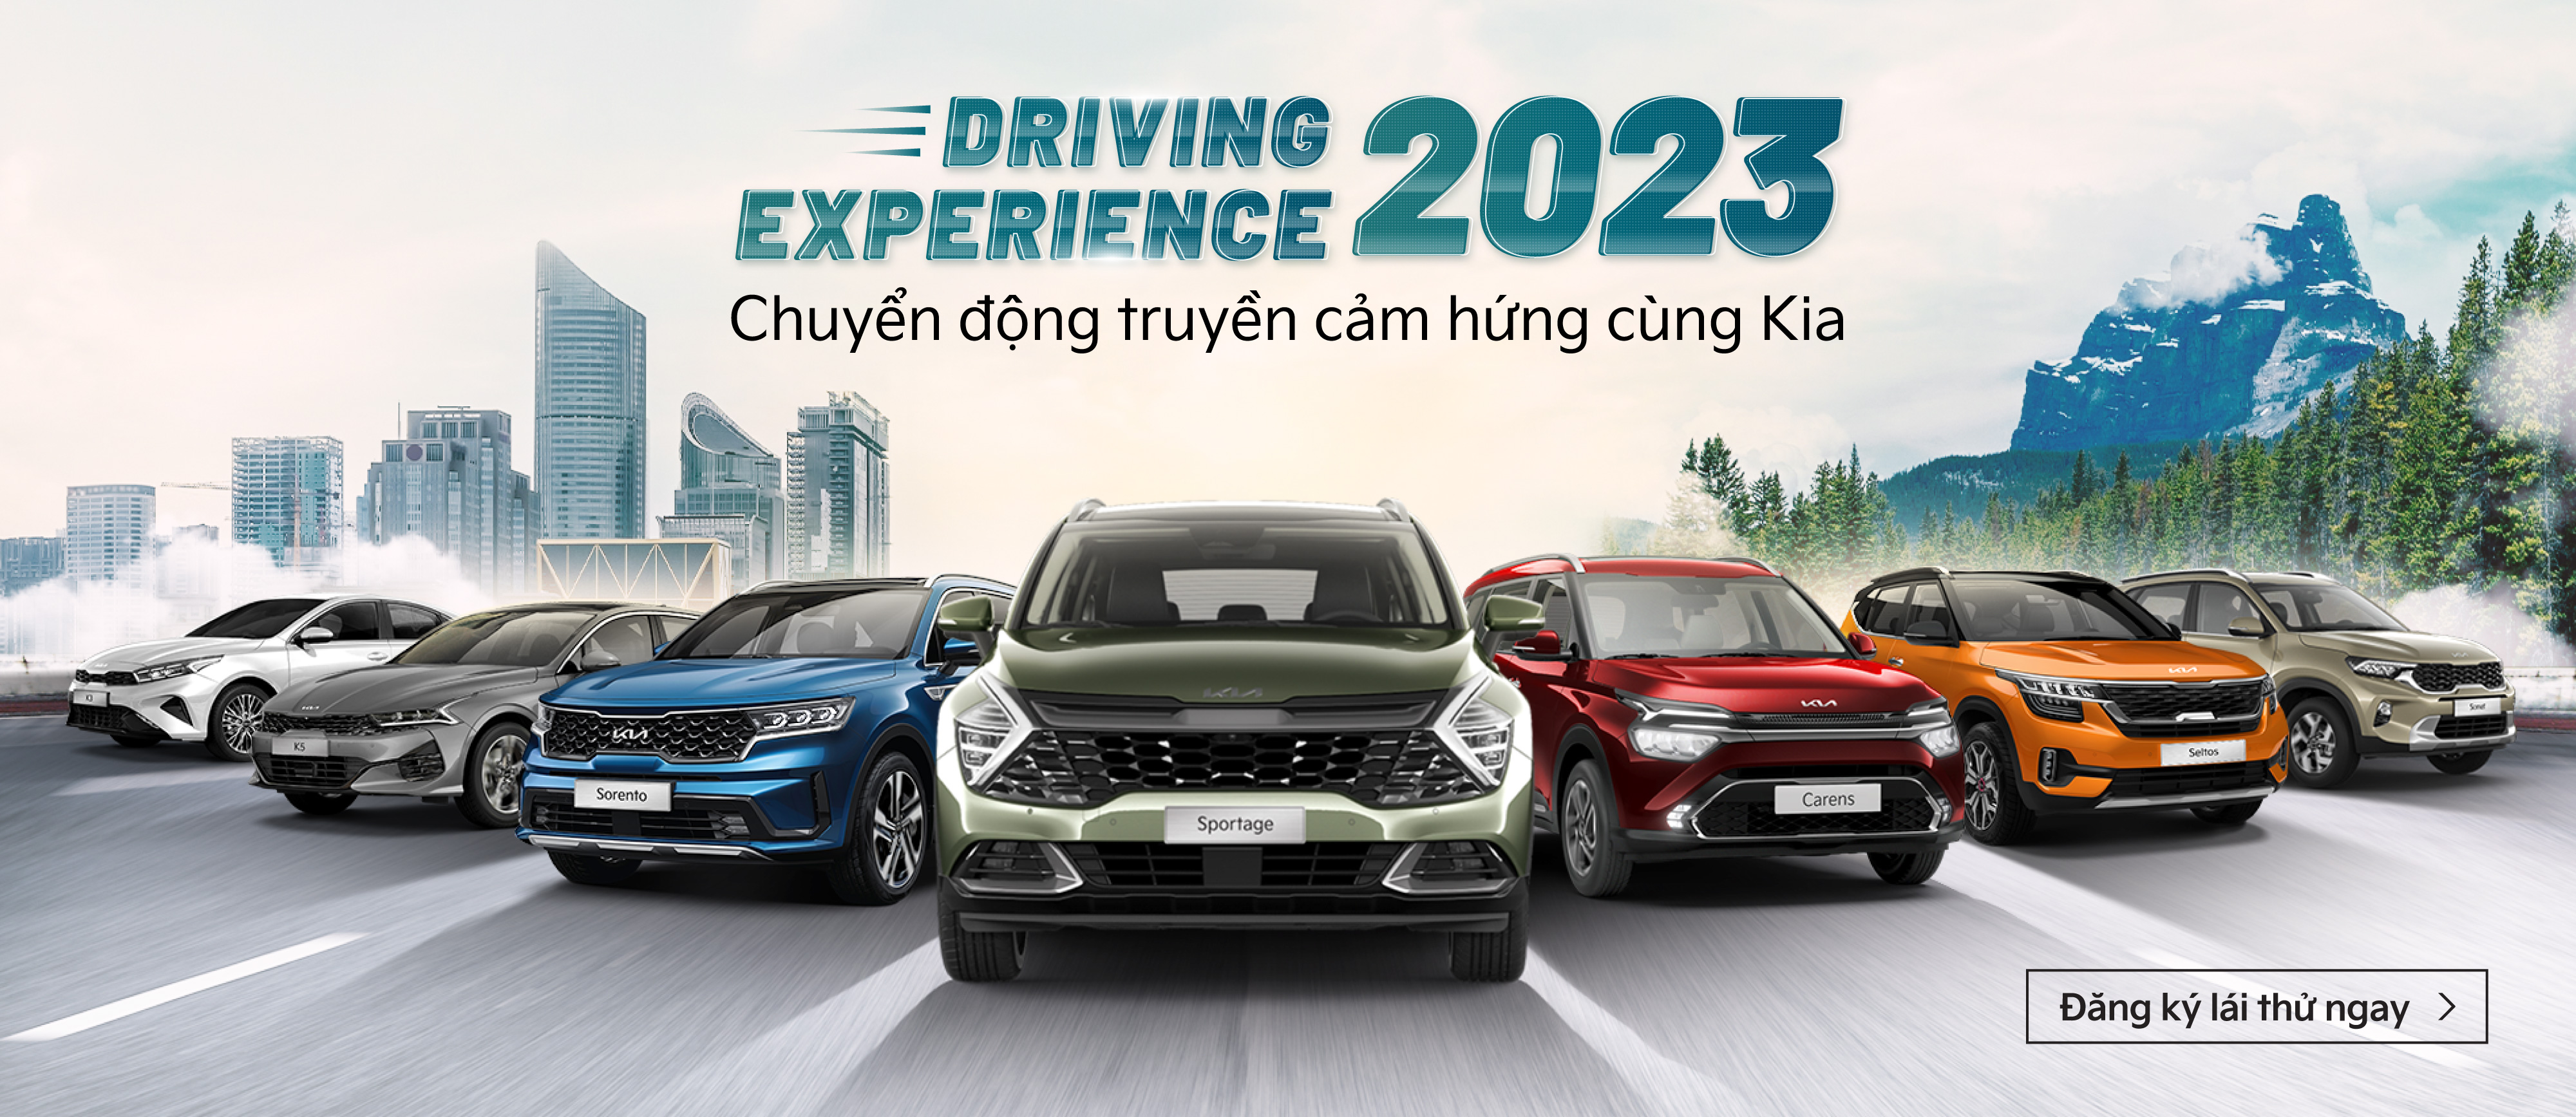 driving-experience-2023-banner-web-1920x833